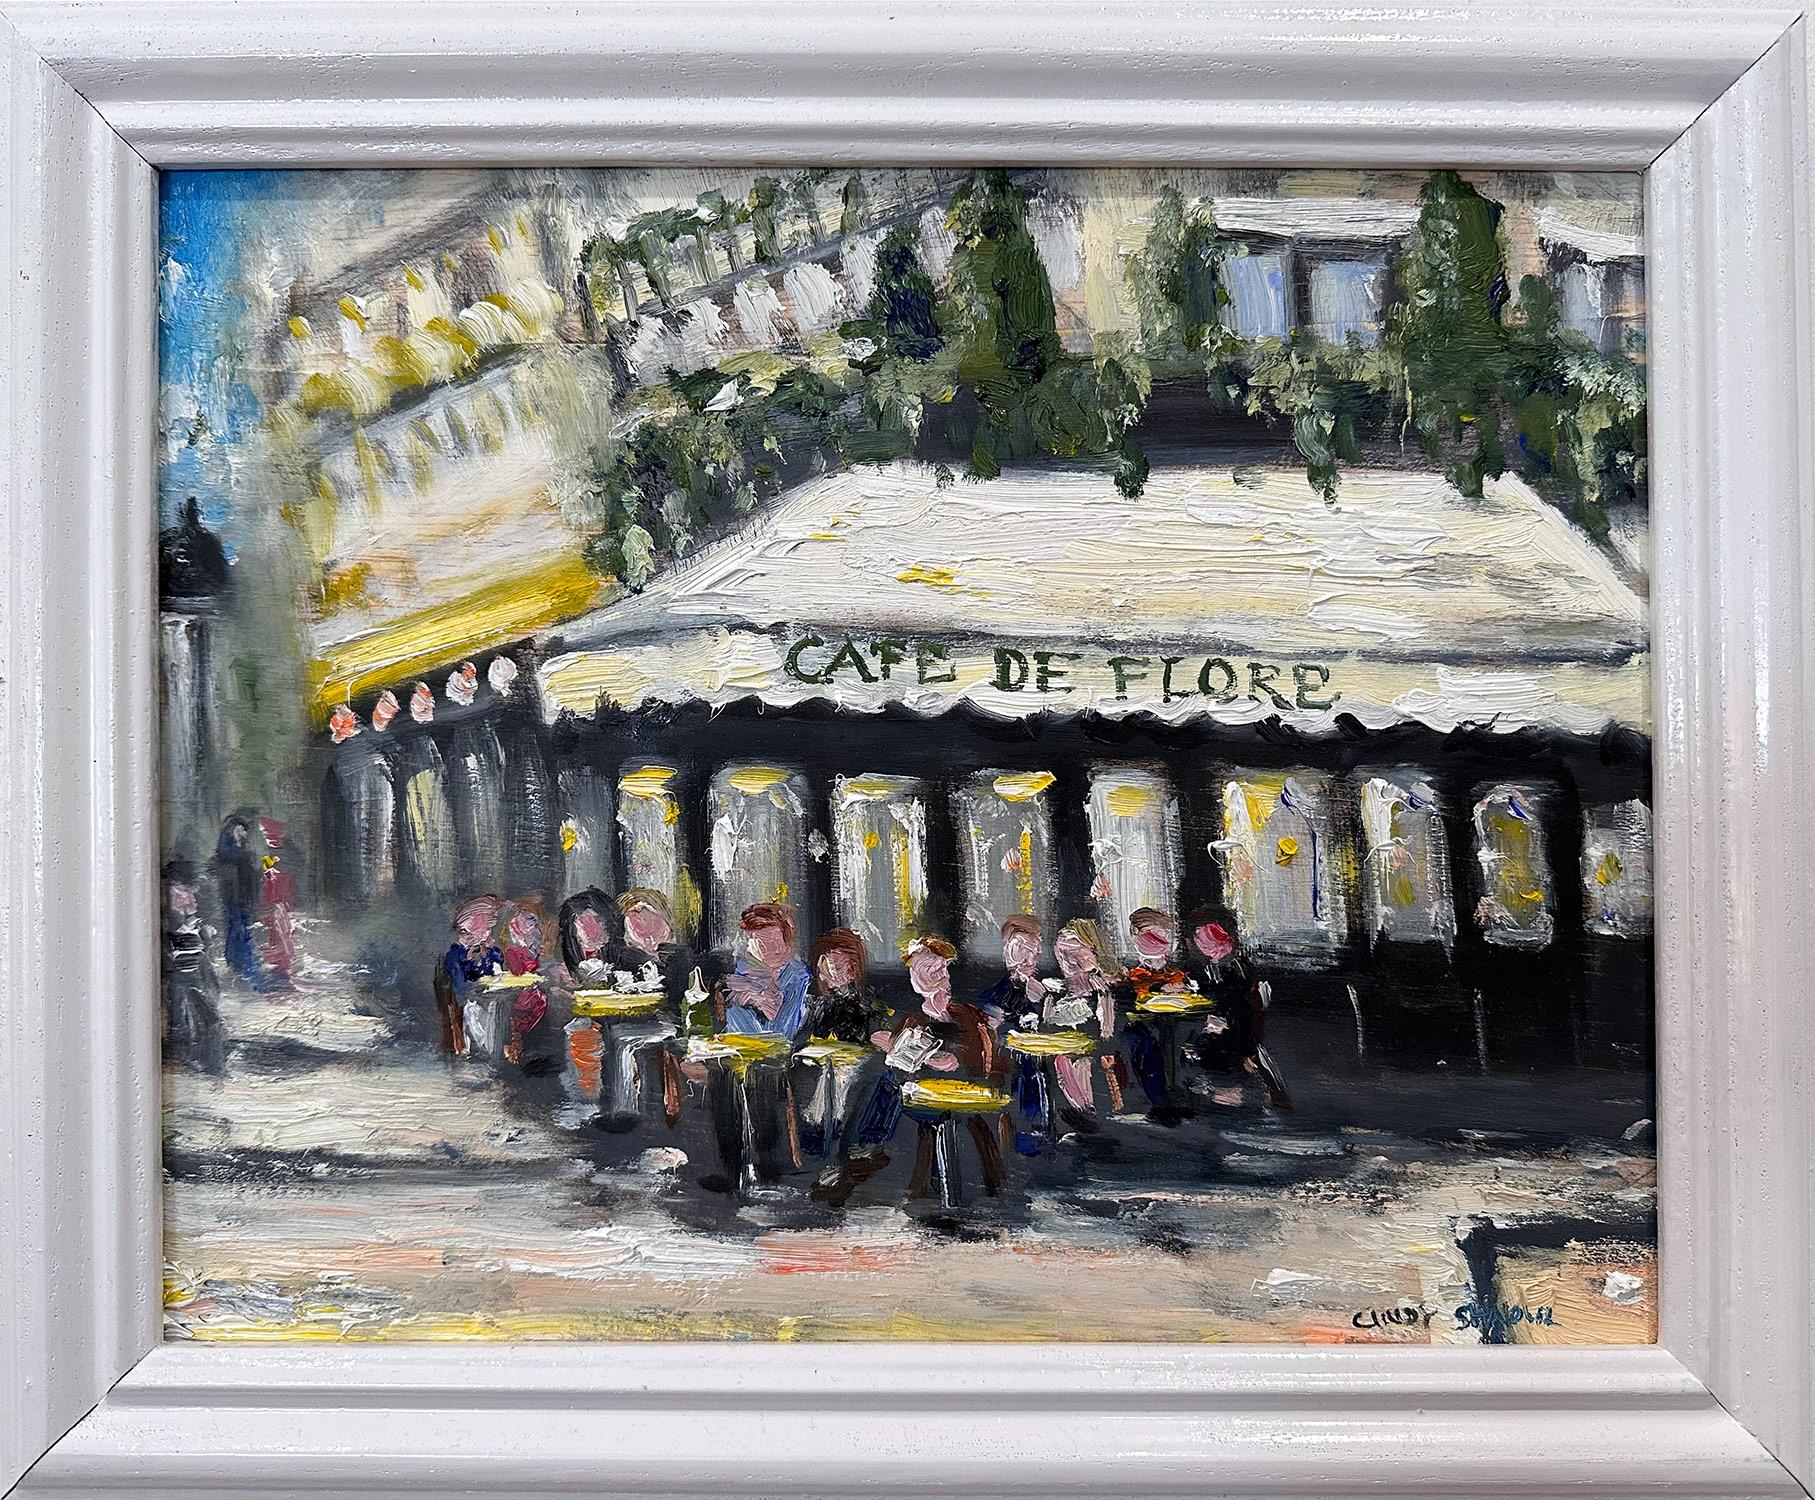 Cindy Shaoul Figurative Painting - "Brunch at Cafe Flore" Plein Air Restaurant Oil Painting in Paris France